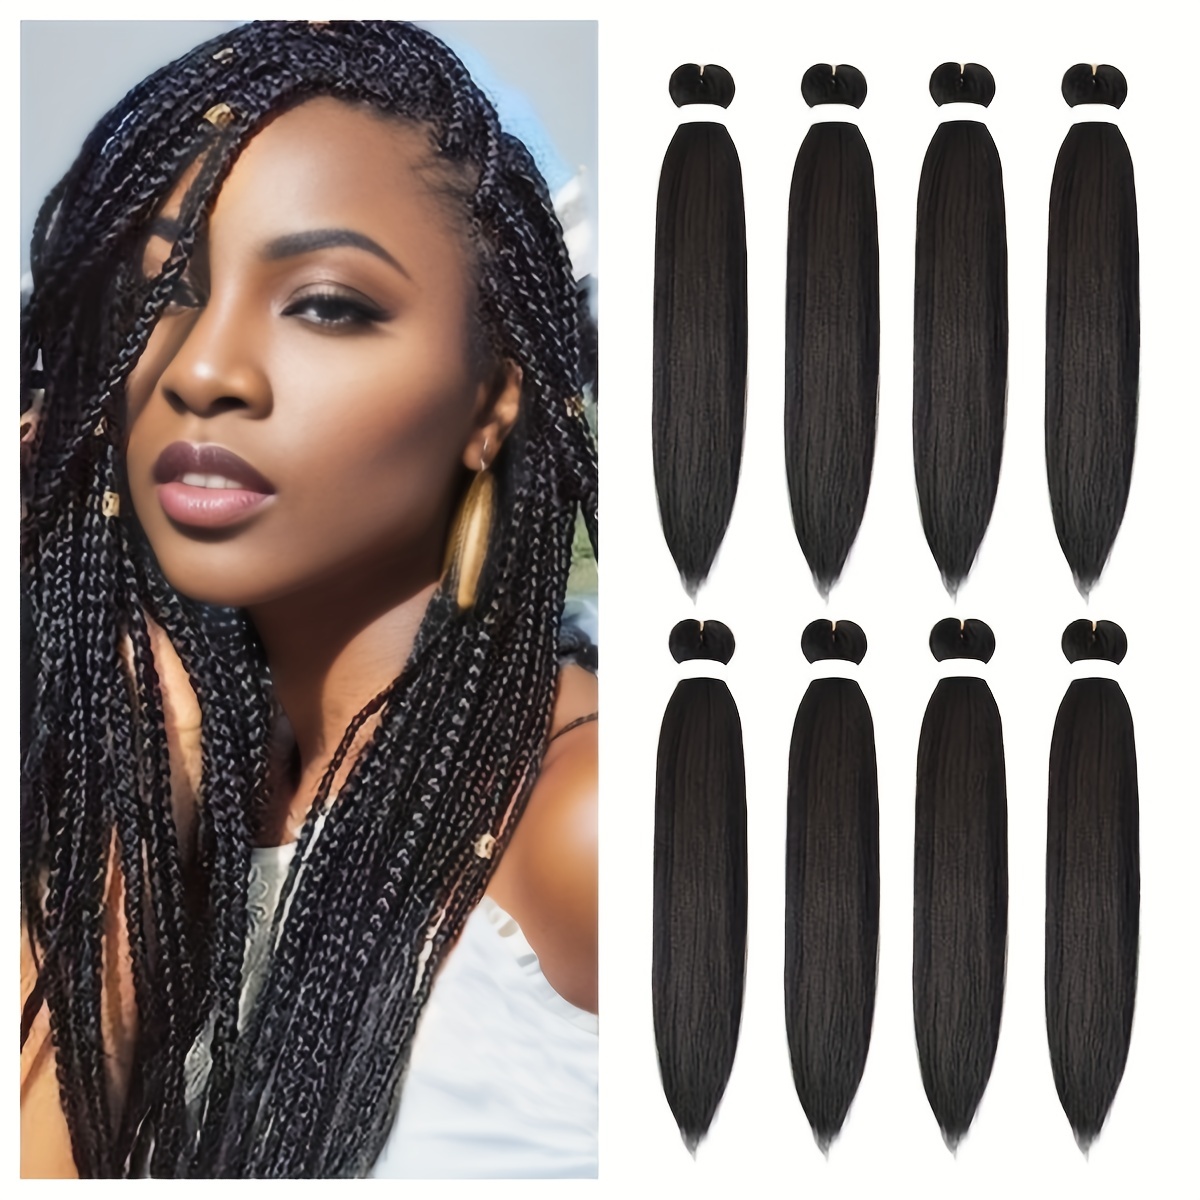  Green Braiding Hair Extensions 16 Inch Pre stretched Braiding  Hair Hot Water Setting Synthetic Hair Pre Stretched Crochet Braids Hair(16  Inch,3 Packs,Green#） : Beauty & Personal Care